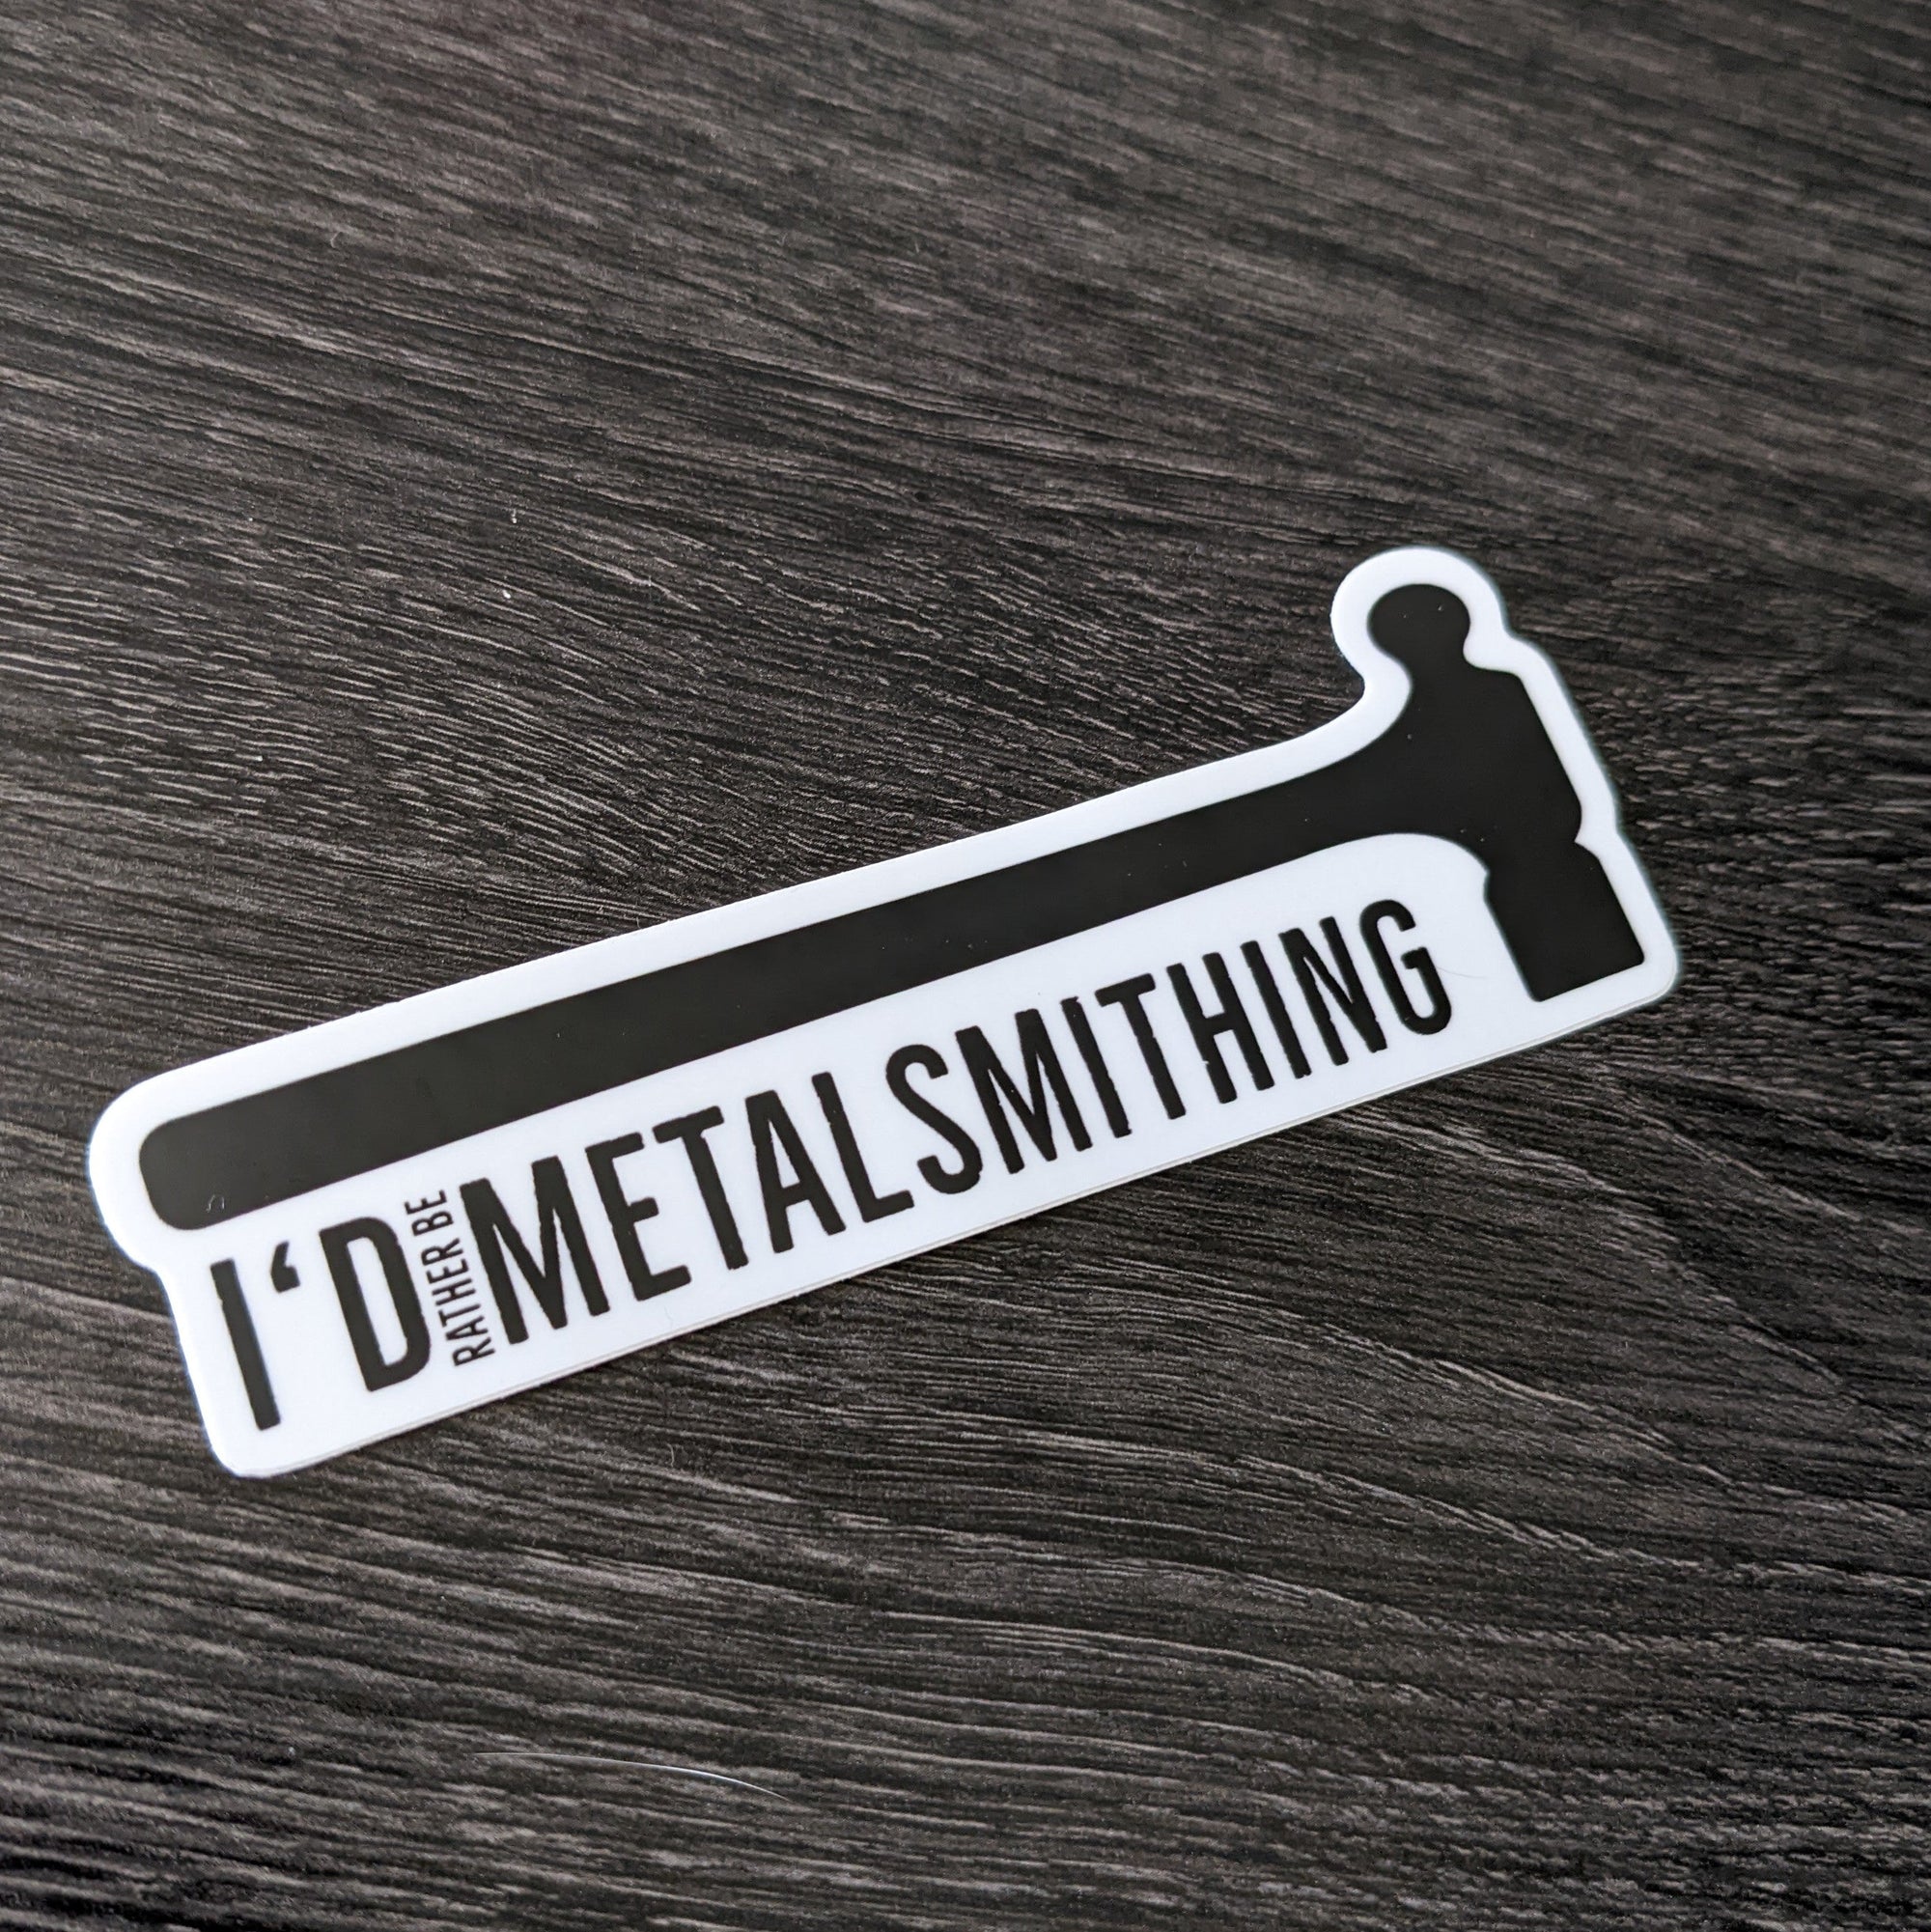 I'd Rather be Metalsmithing Vinyl Stick or Keychain, Metalsmith Gifts for her or him, Jewelry making gifts